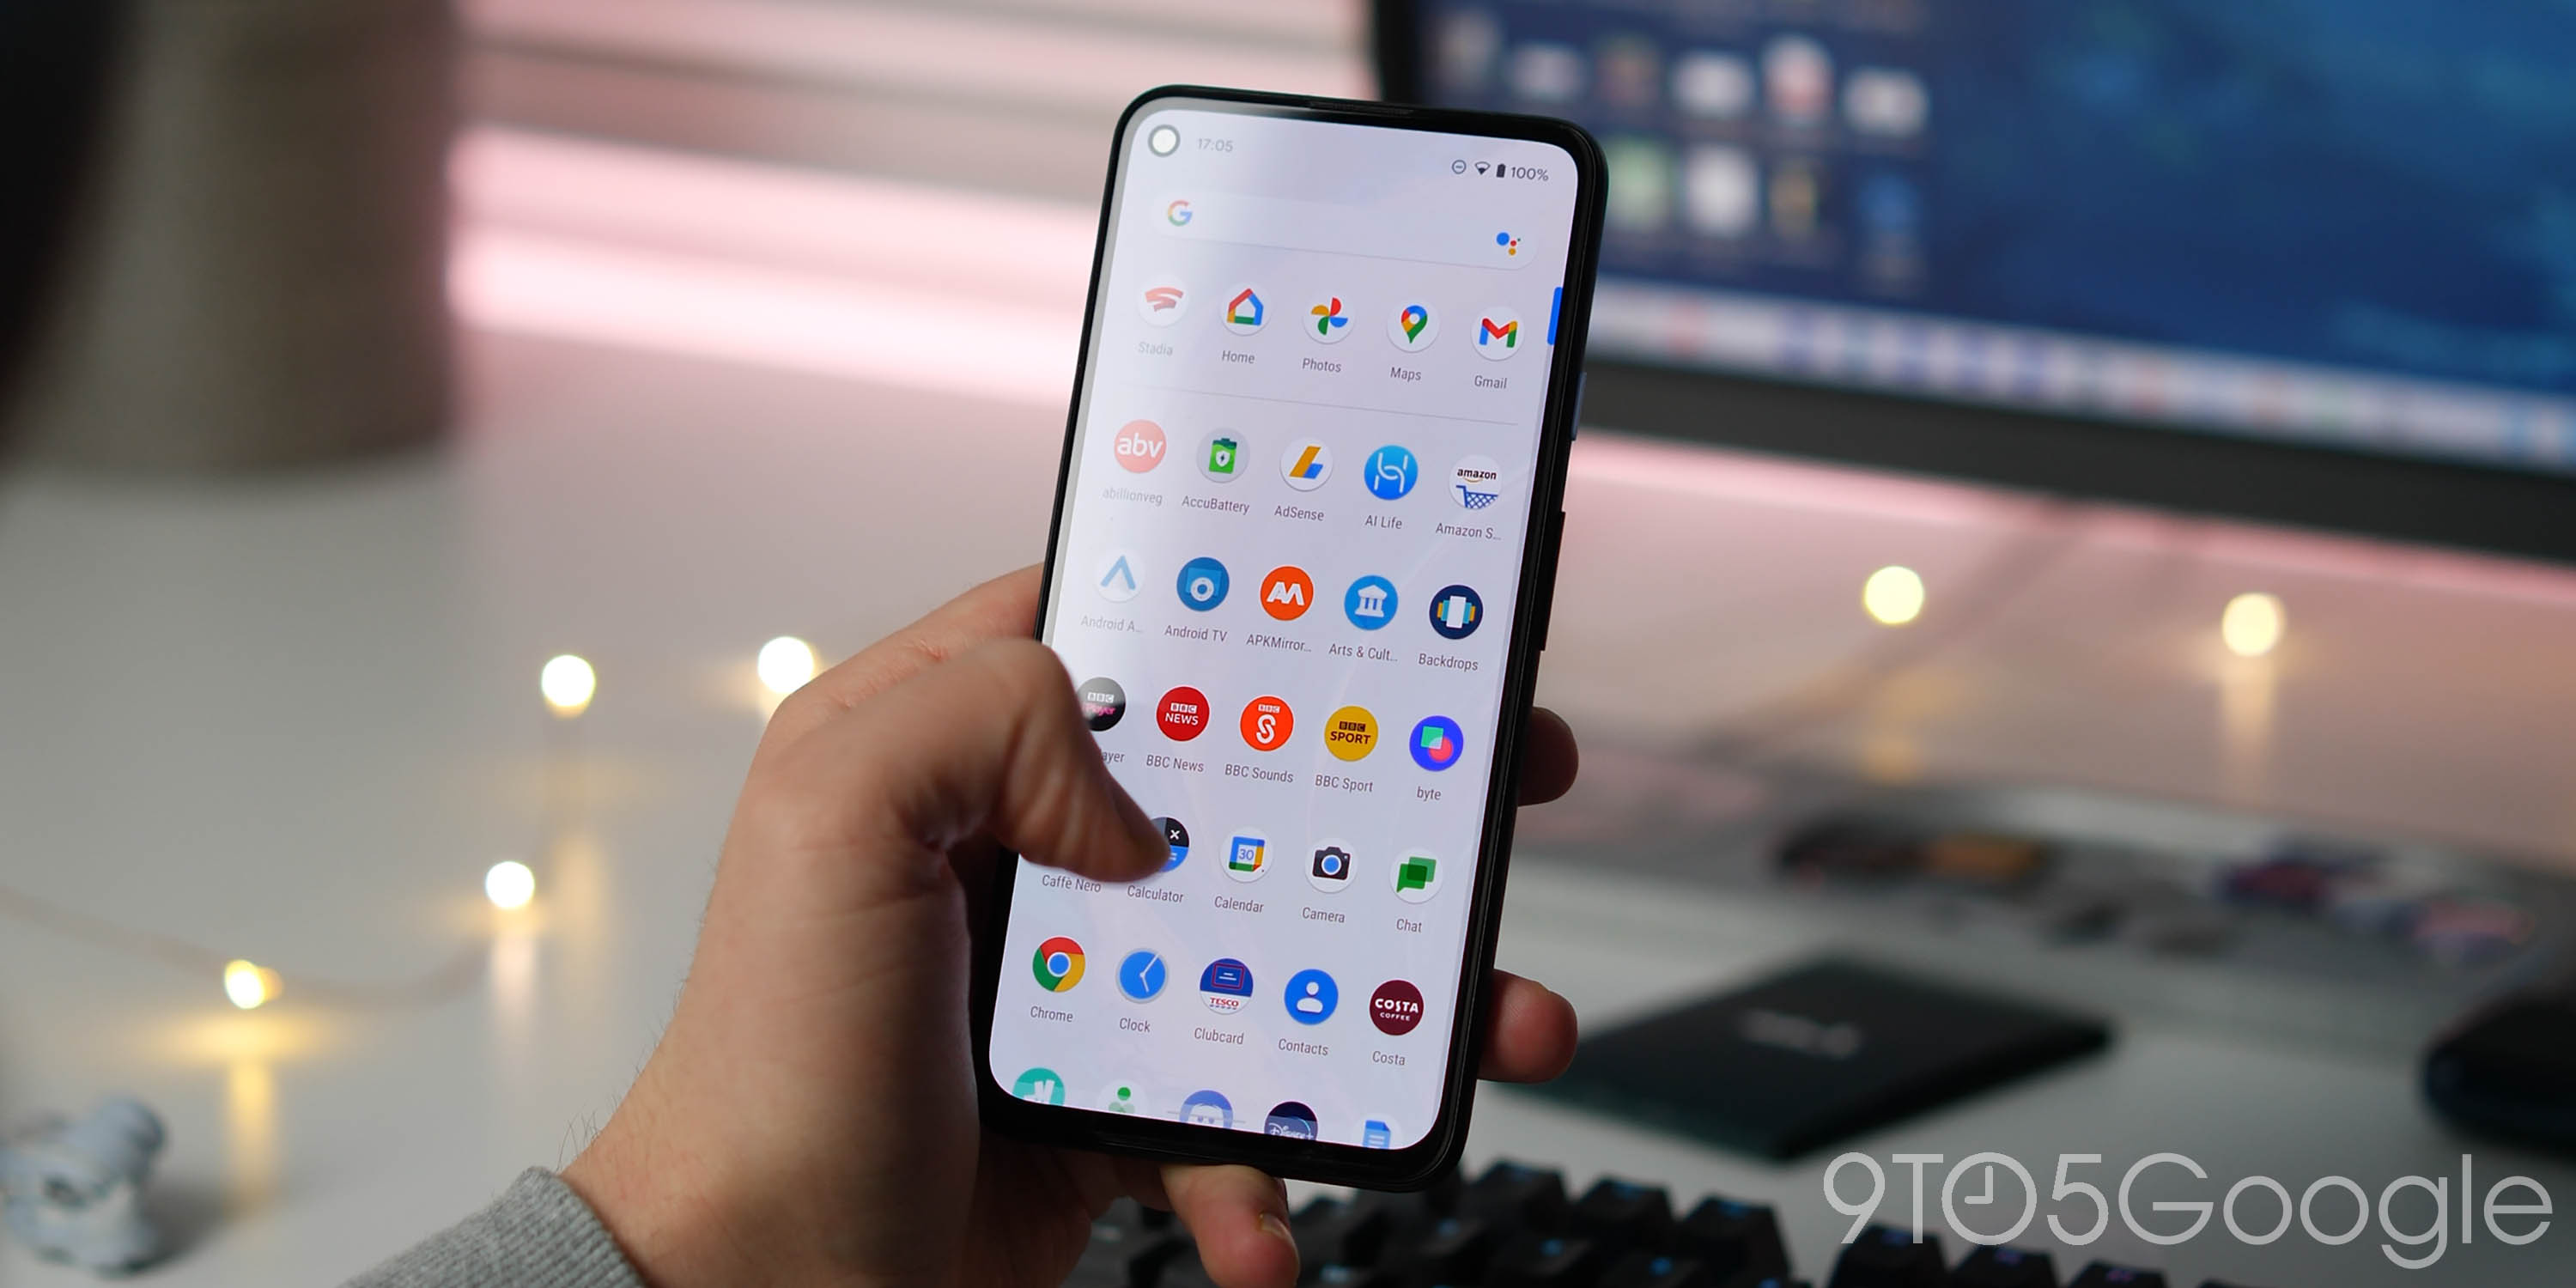 Google releasing $499 Pixel 4a 5G in Clearly White - 9to5Google